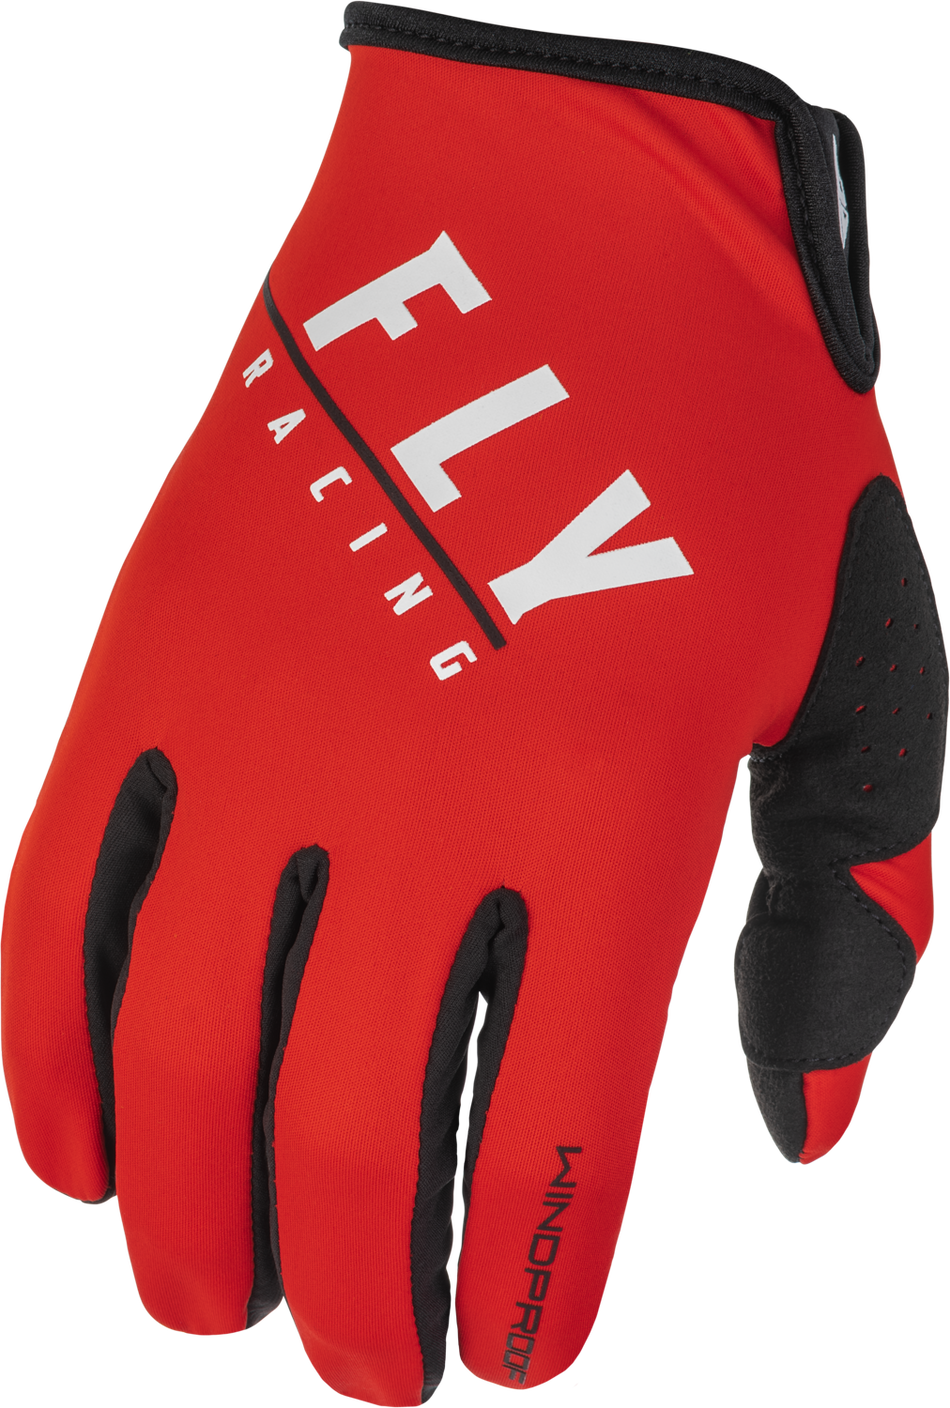 FLY RACING Youth Windproof Gloves Black/Red Sz 06 371-14306